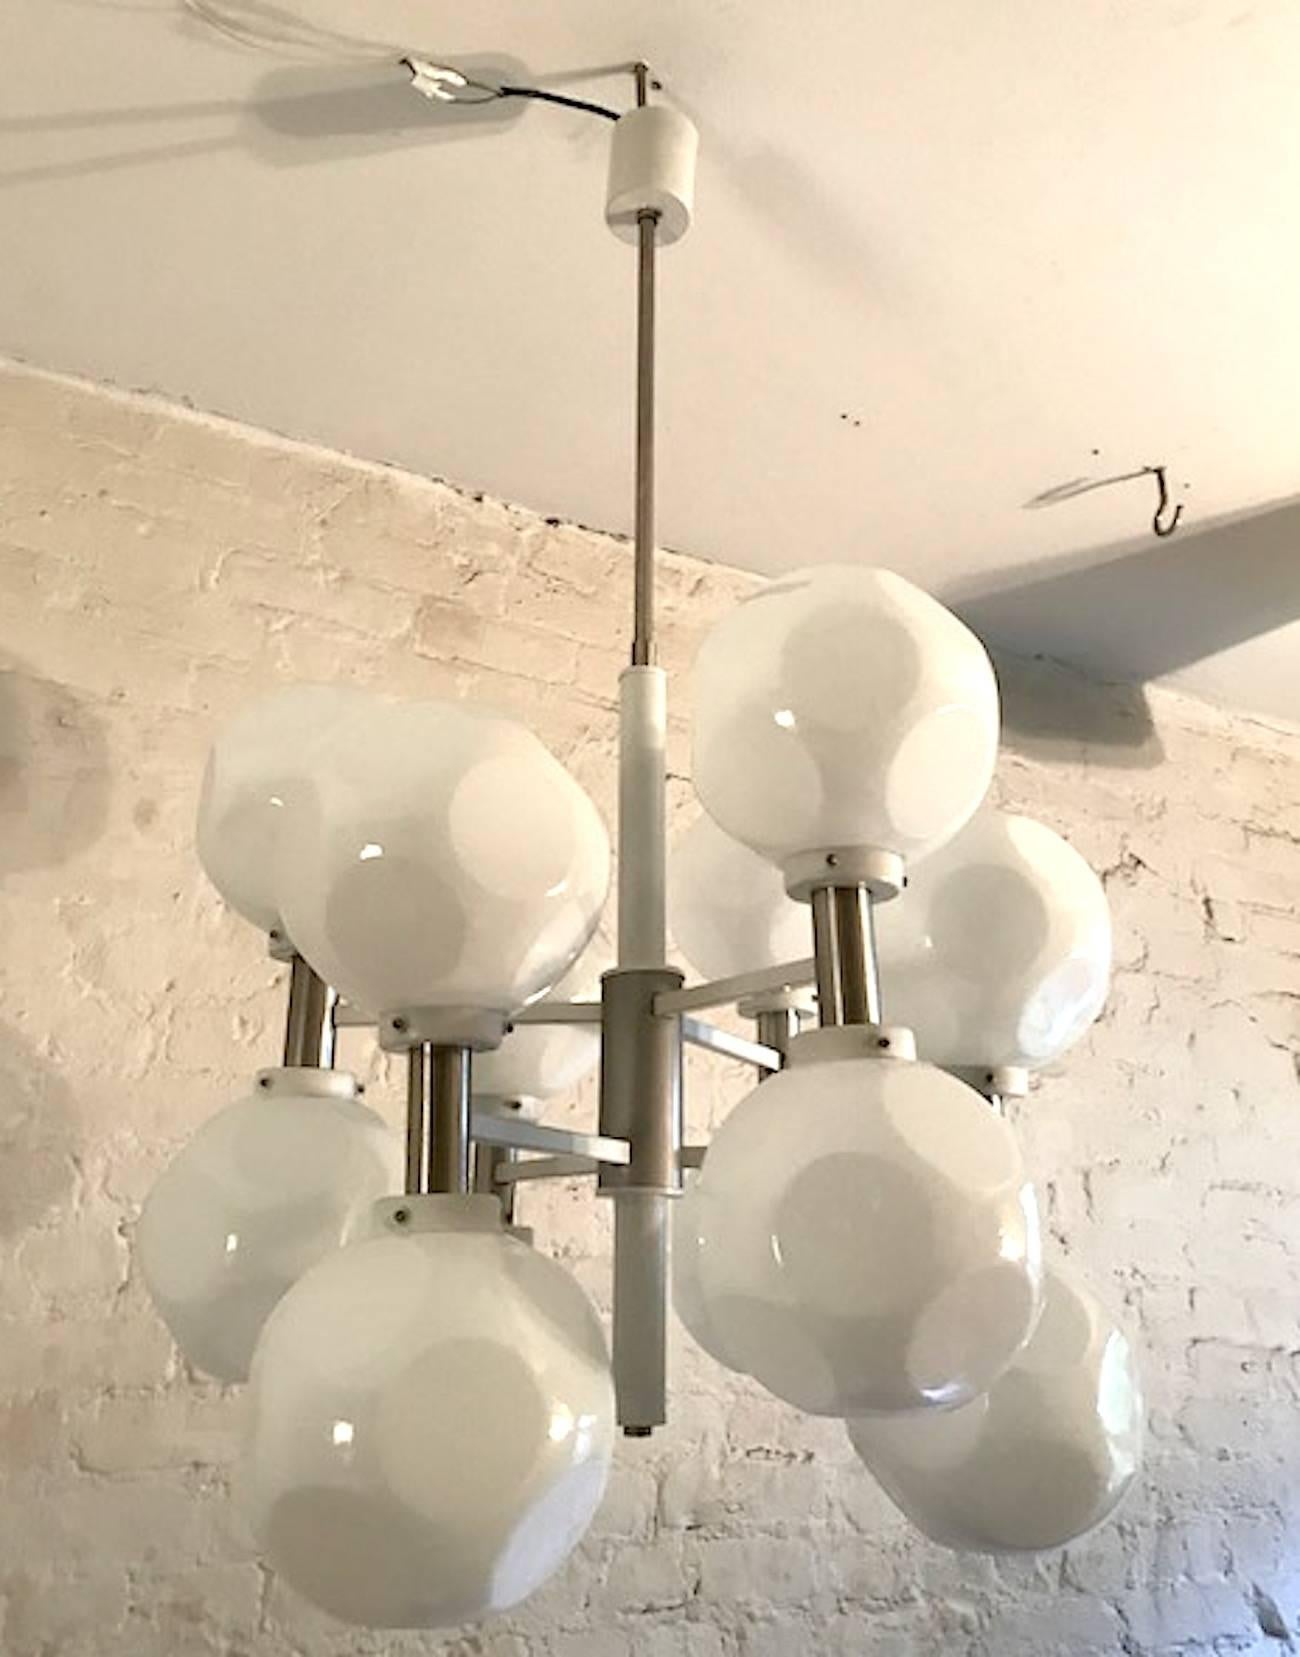 A beautiful Italian late 1960s-1970s Mod 12-light chandelier. The frame of the chandelier has satin finish support rods. The shade holders arms, accent rods and ceiling canopy are white enamel. Each shade is case glass of clear over white and formed